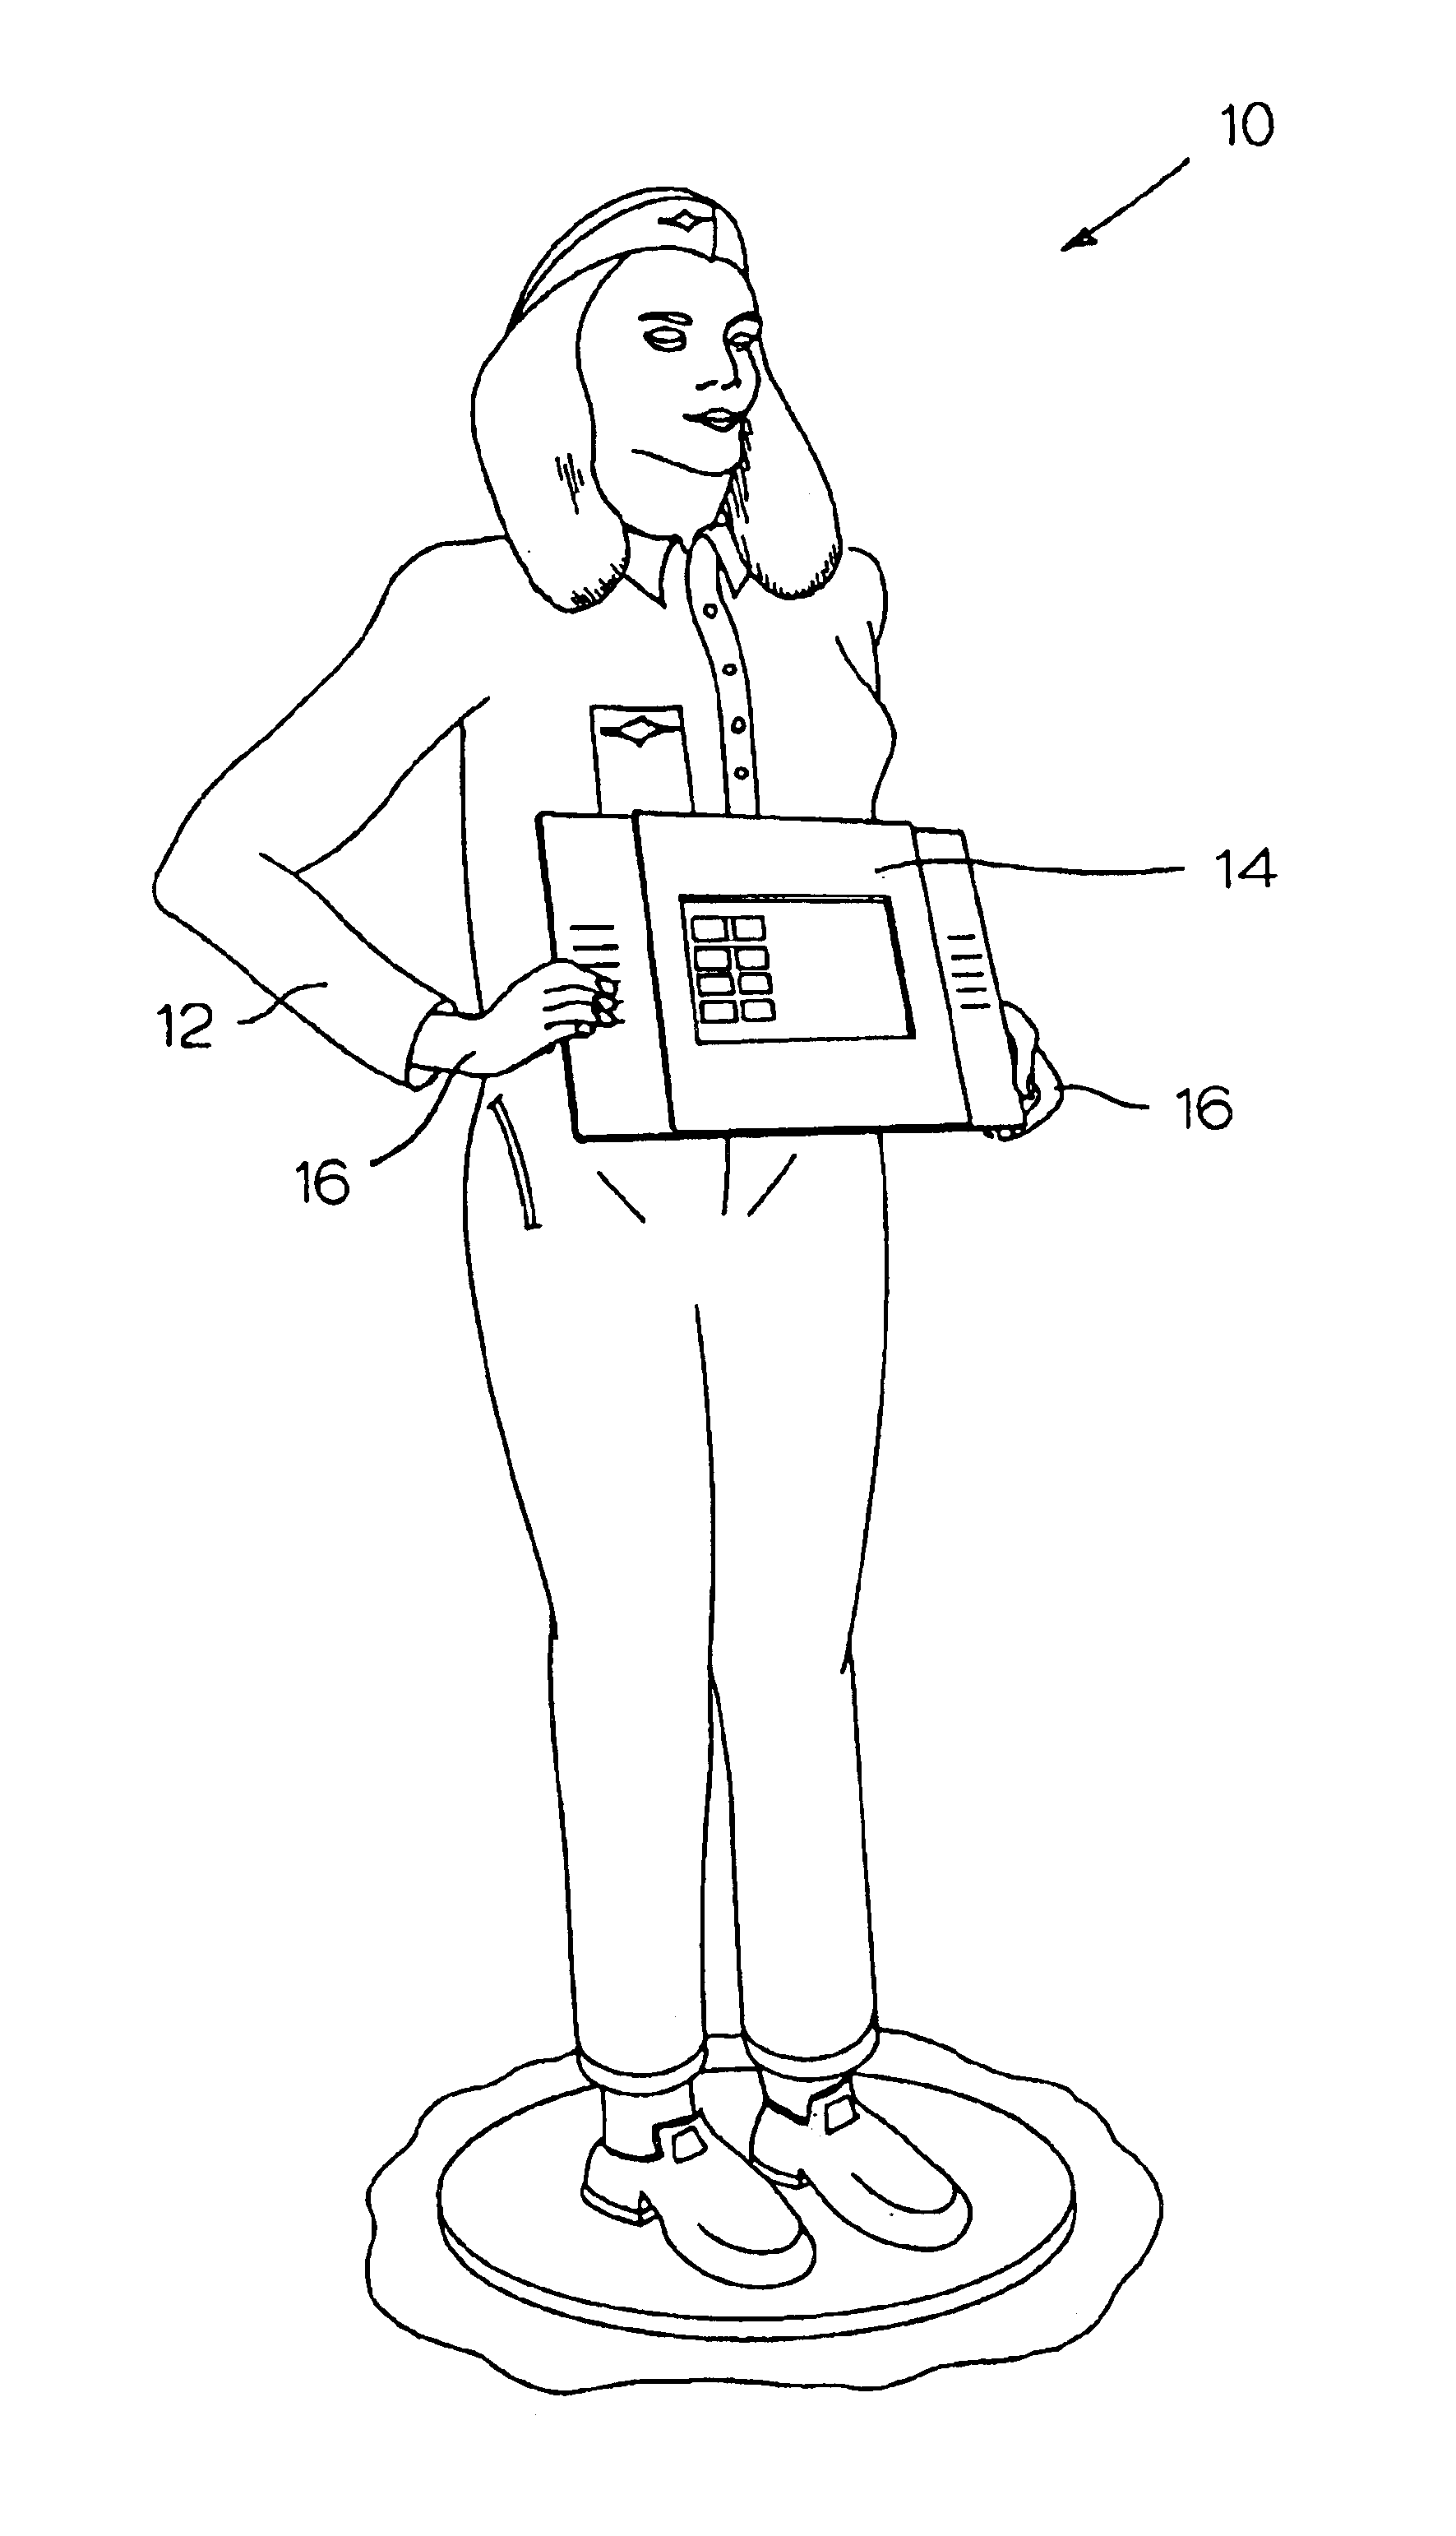 Apparatus and system for displaying wares and services including a mannequin and interactive display panel